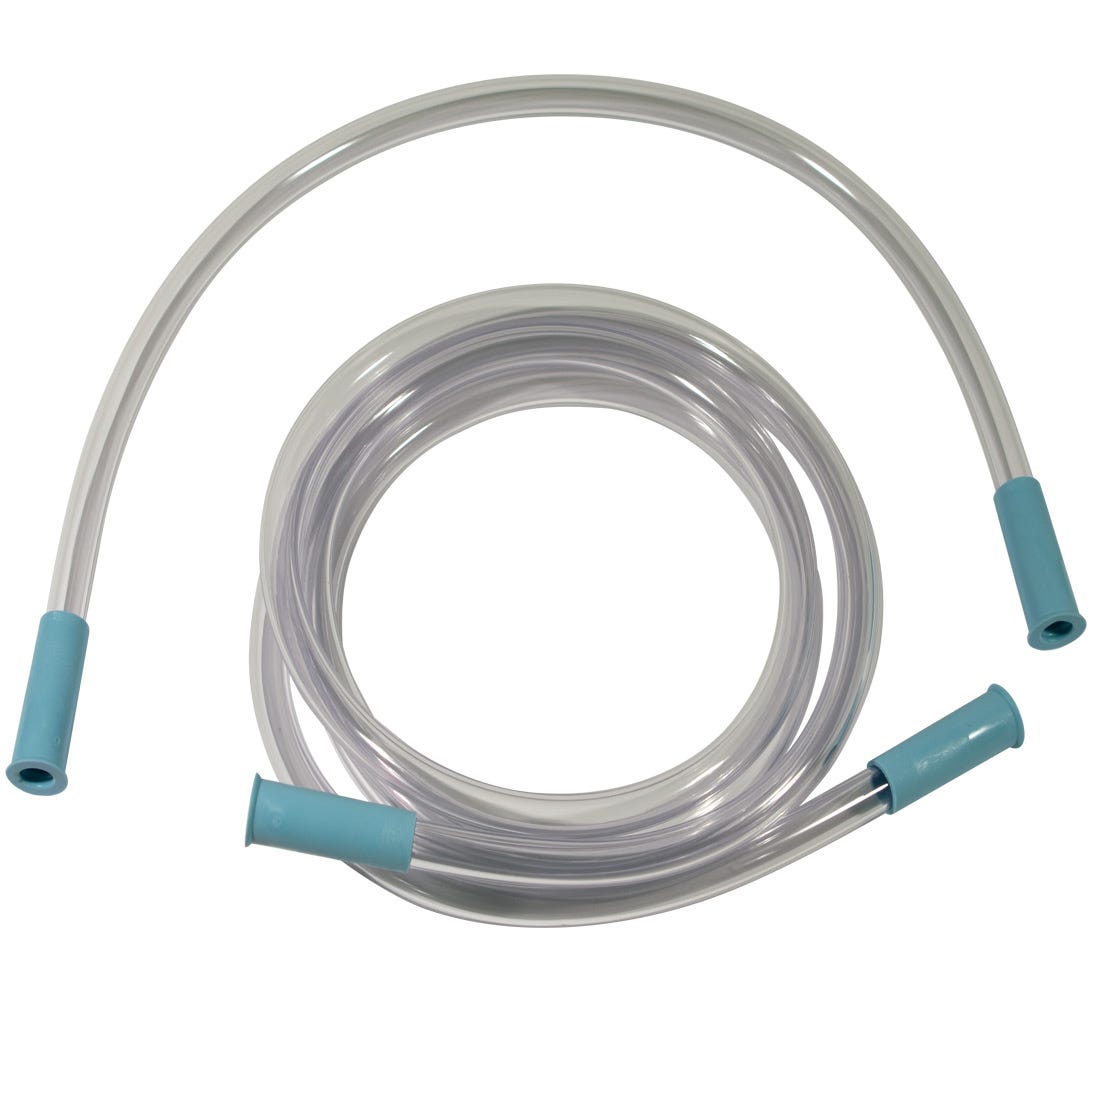 GOMCO OPTIVAC G180 - Suction Tubing Kit: includes 1-72" and 1-18" clear